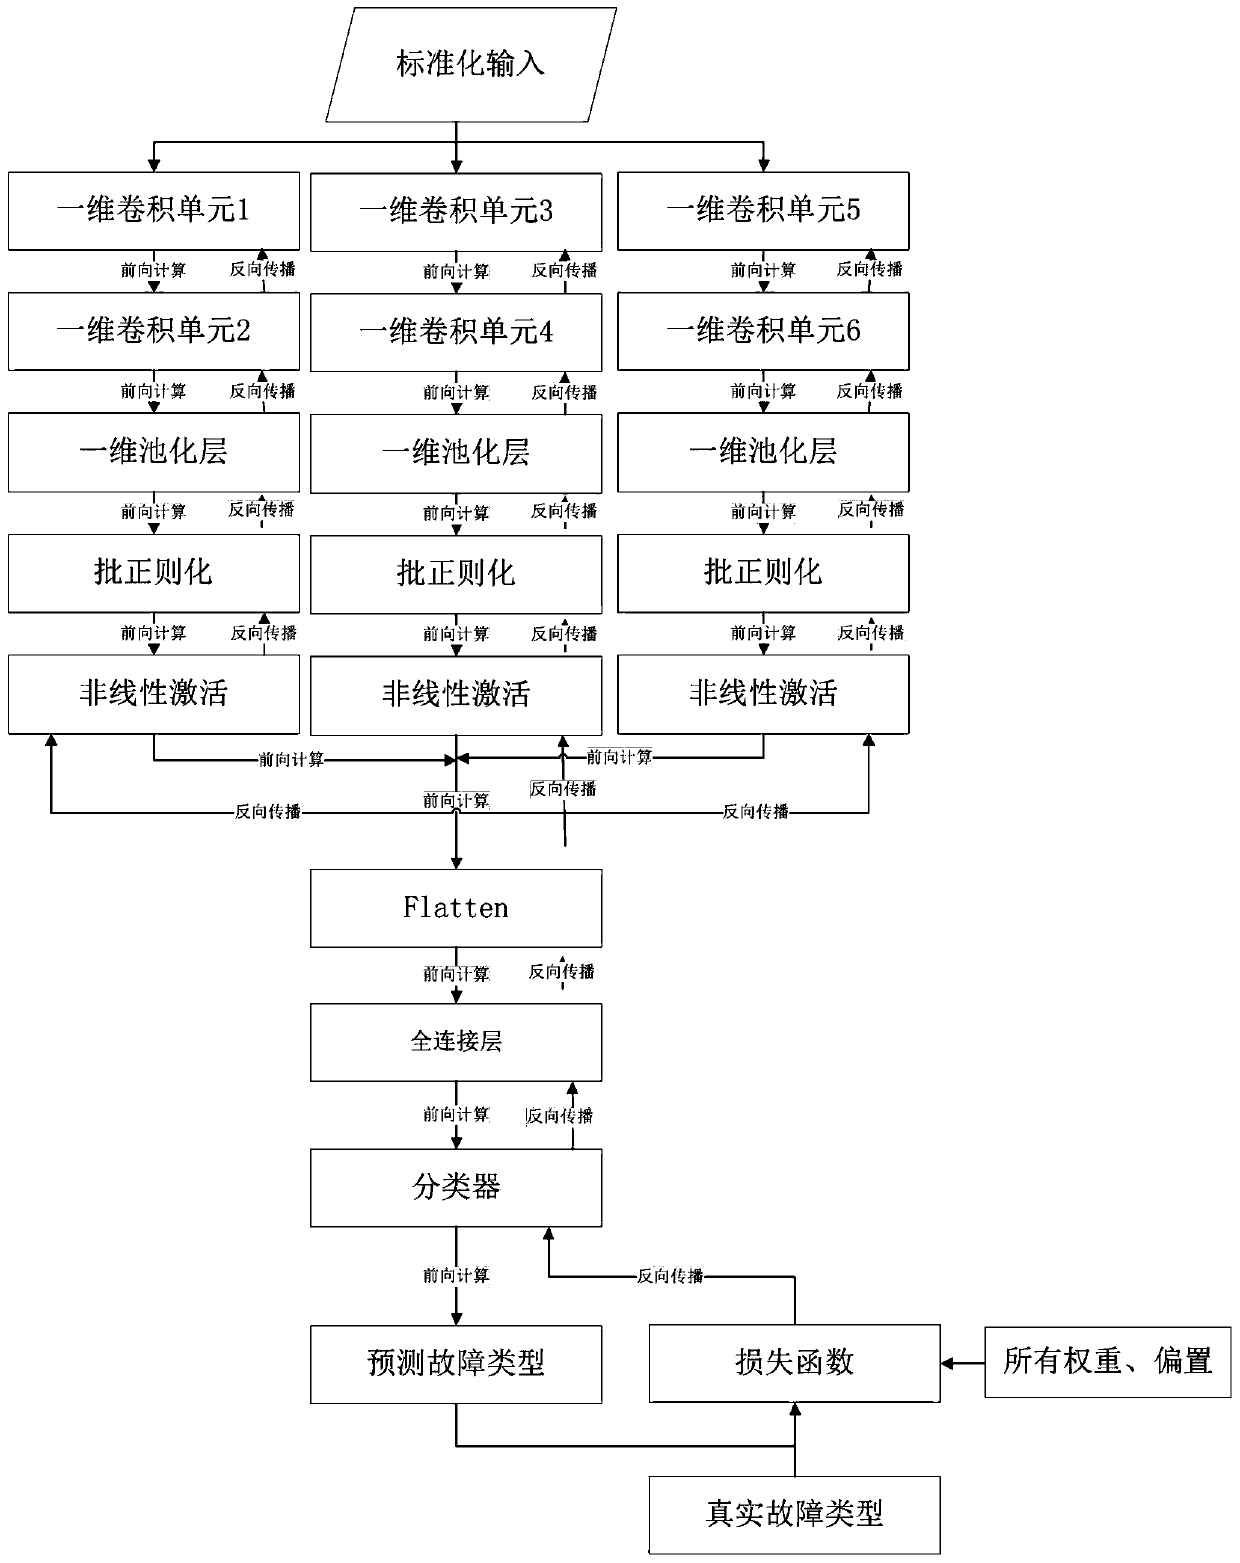 Fault classification method based on one-dimensional multi-path convolutional neural network